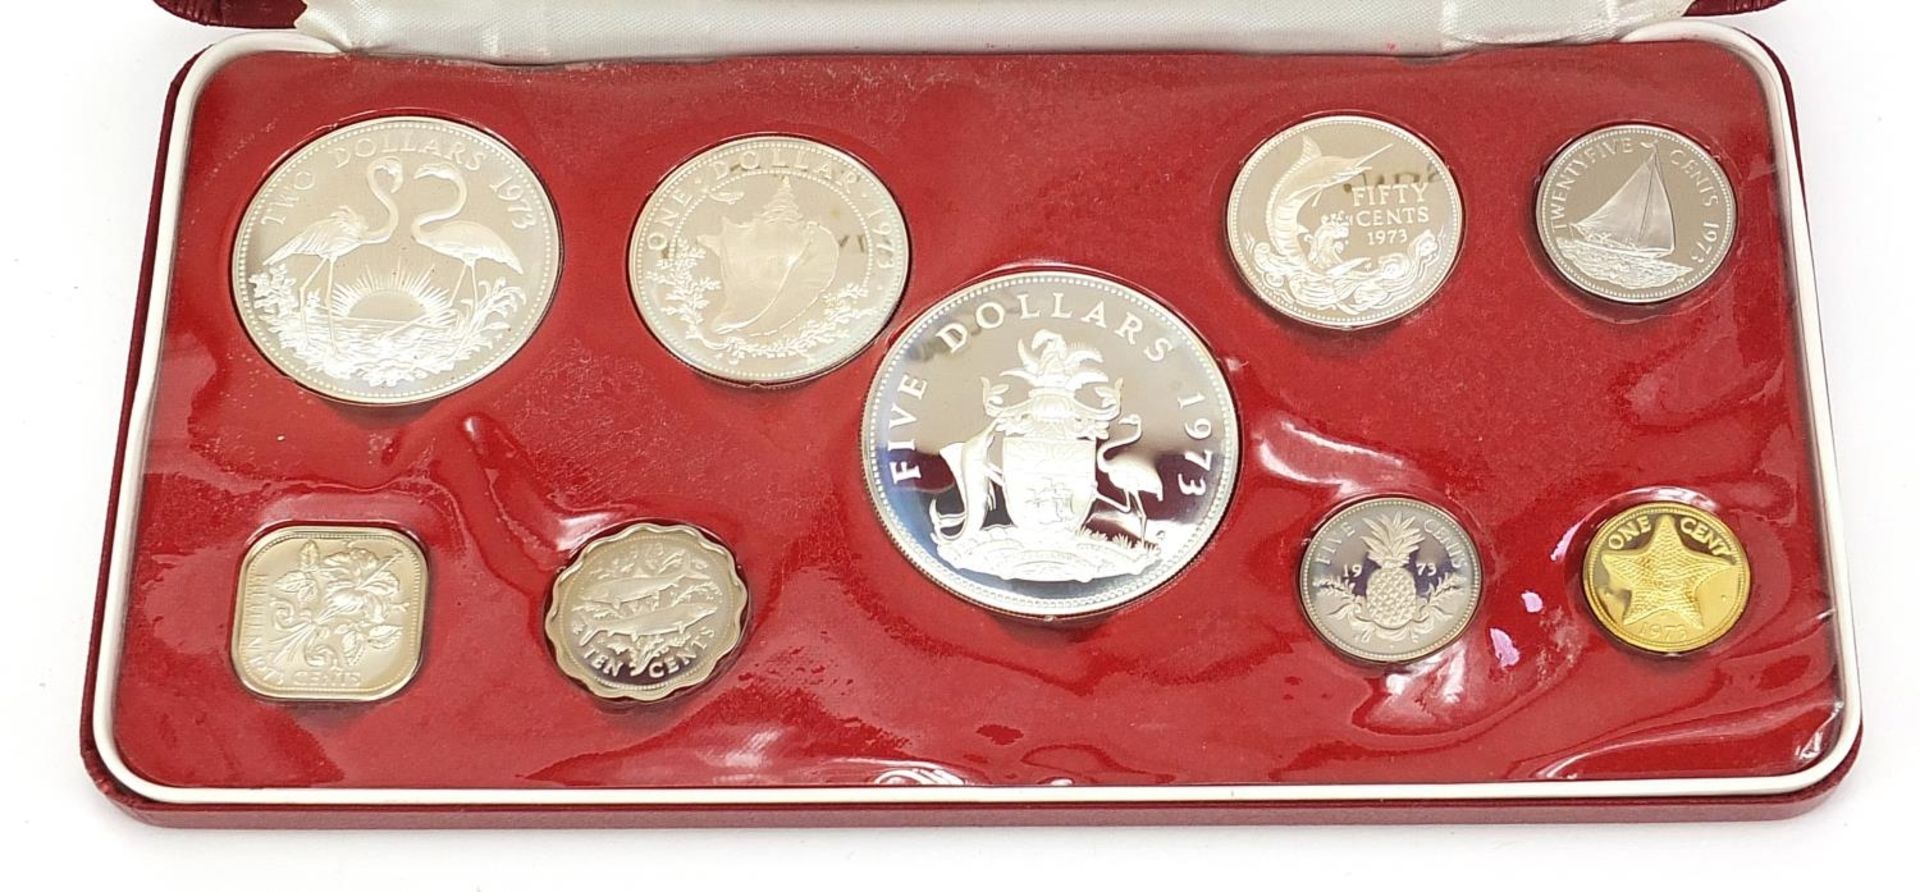 1973 Commonwealth of Bahama Island proof coin set including silver five dollars, two dollars, one - Image 2 of 3